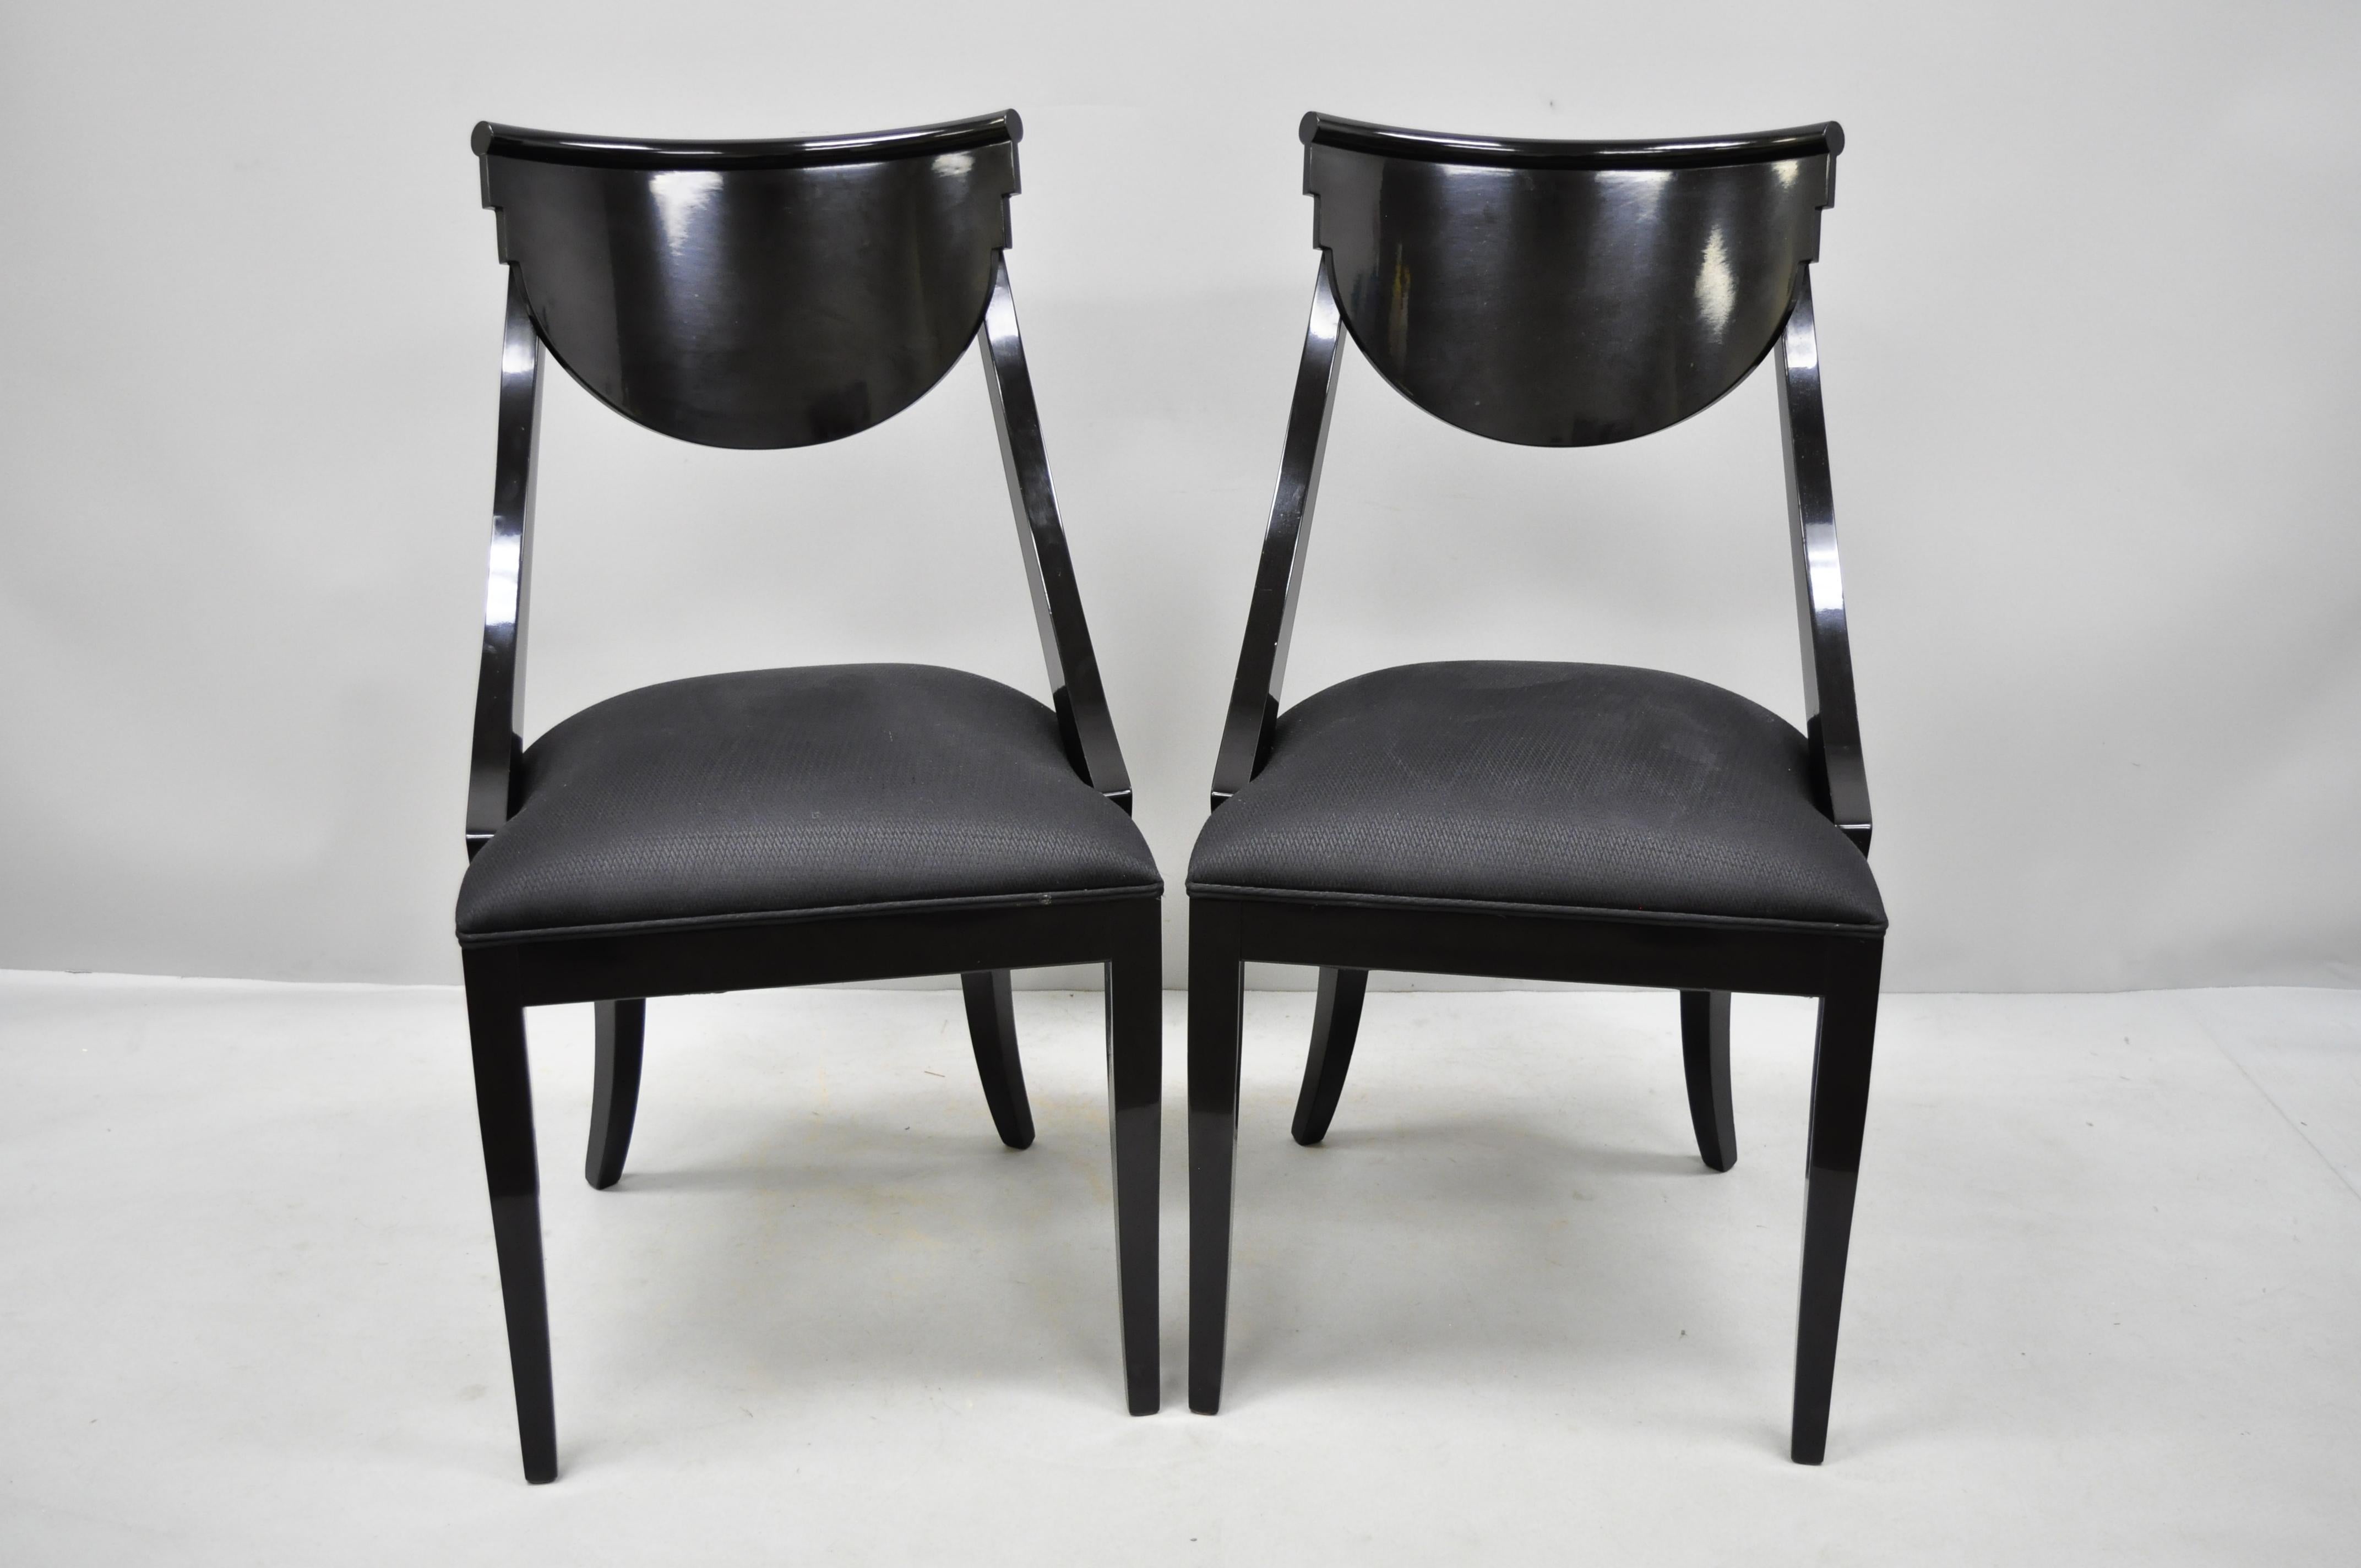 Pair of black lacquer Italian Hollywood Regency style side chairs by Pietro Costantini. Items include glossy black lacquer finish, solid wood construction, original label, shapely saber legs, great style and form, circa late 20th century.